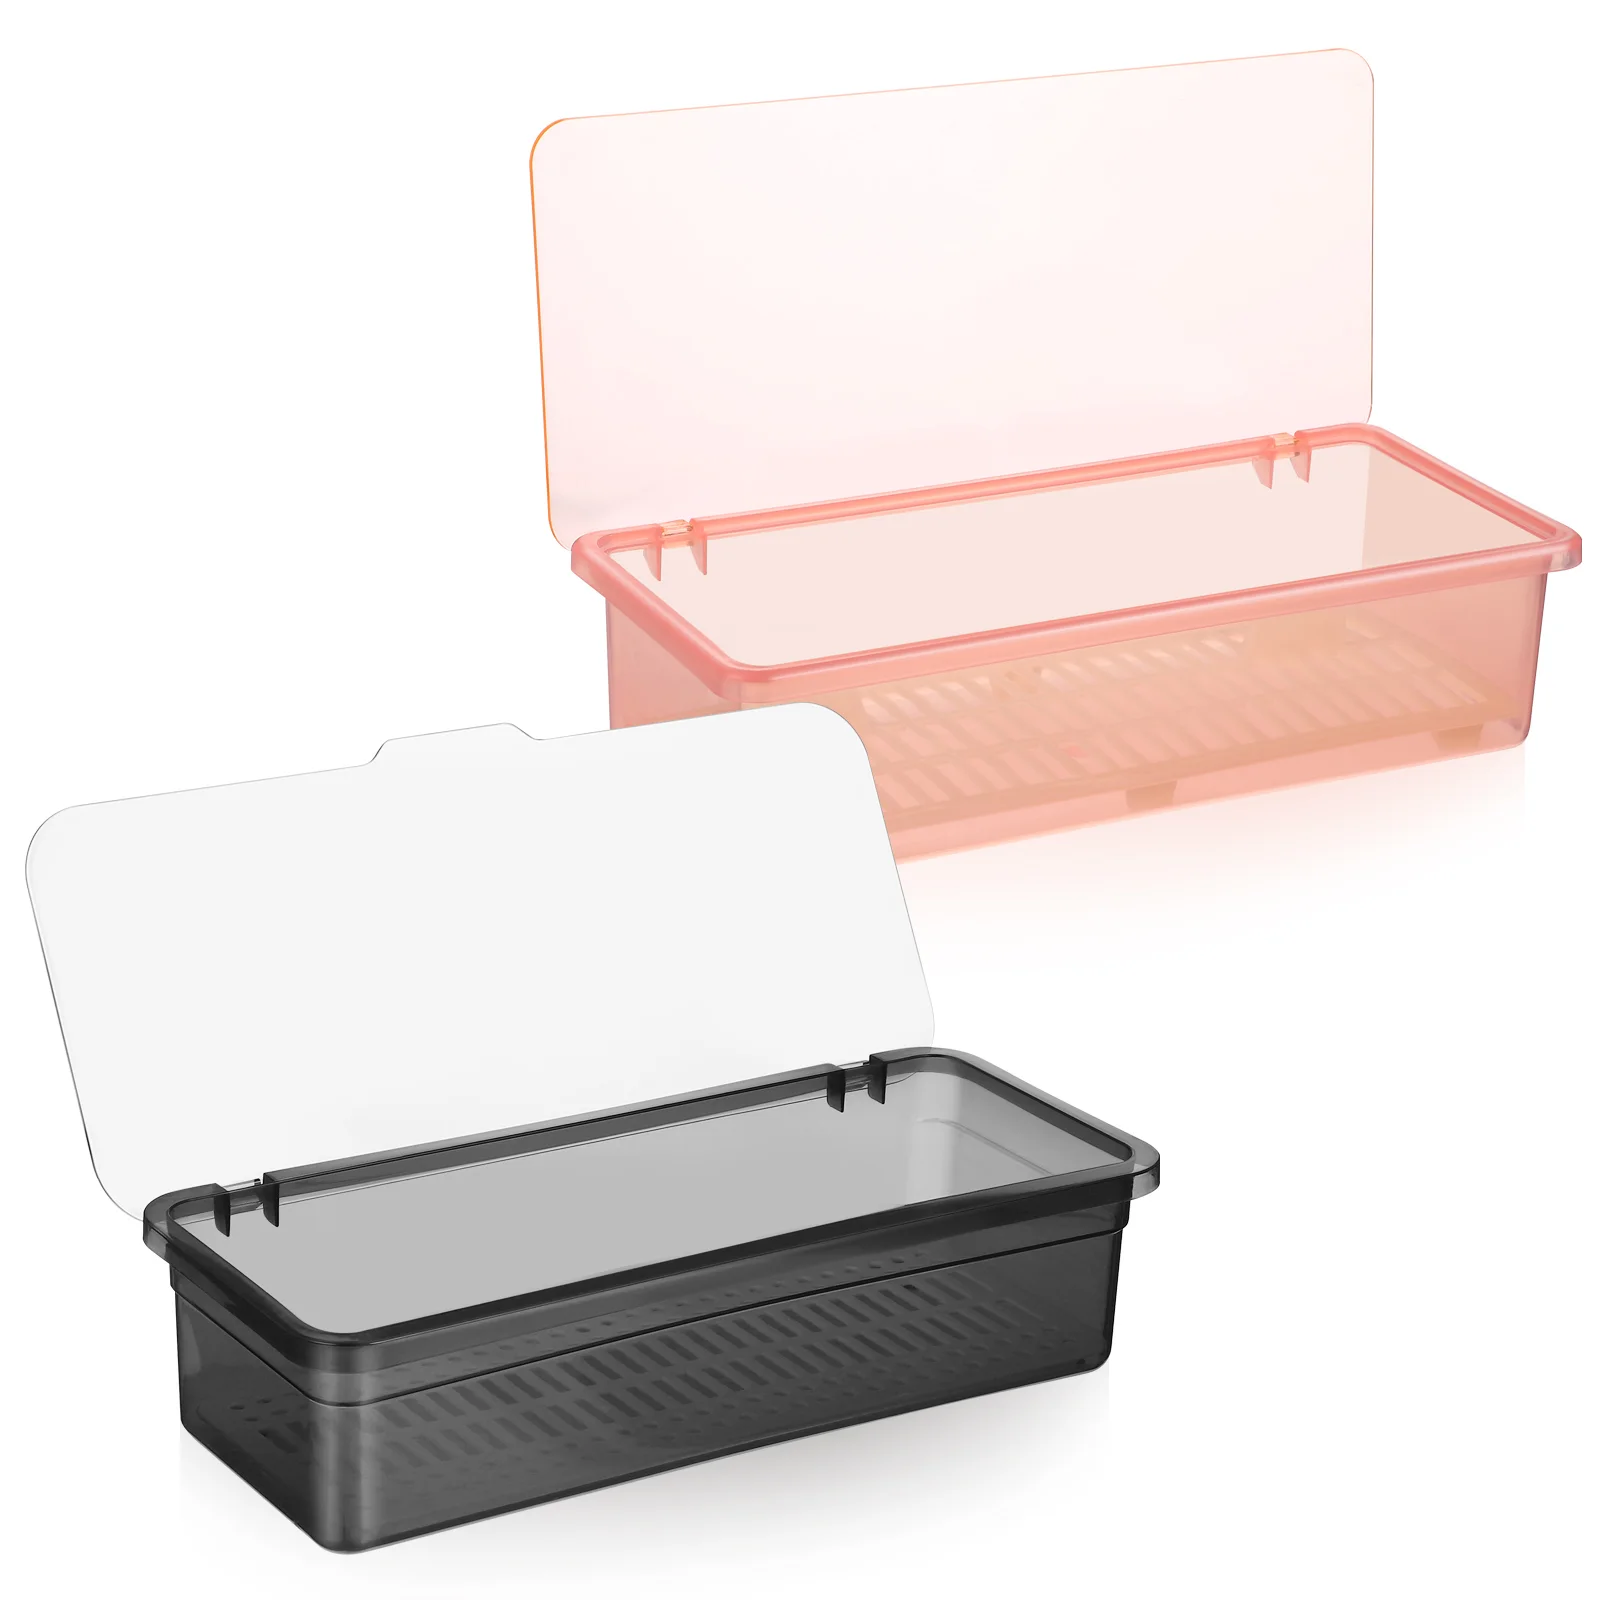 

2 Pcs Drain Box Lid Organizer for Plastic Silverware Tray with Container Utensil Serving Utensils Spoon Kitchen Cutlery Drawer